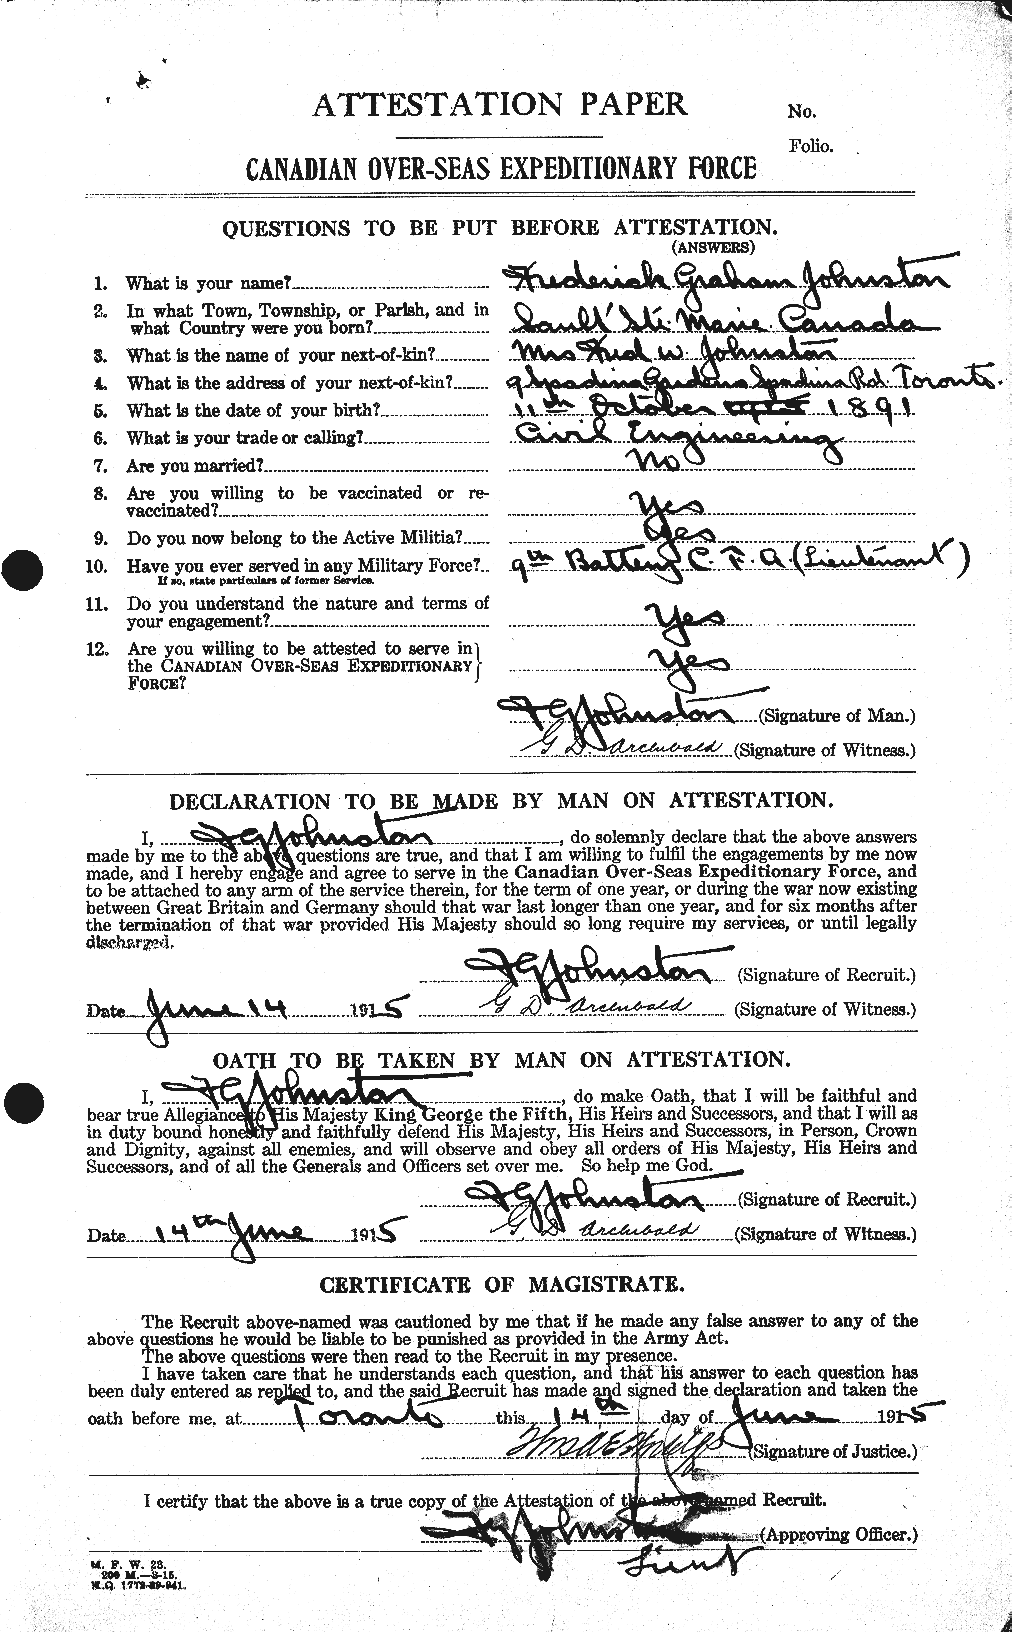 Personnel Records of the First World War - CEF 423297a